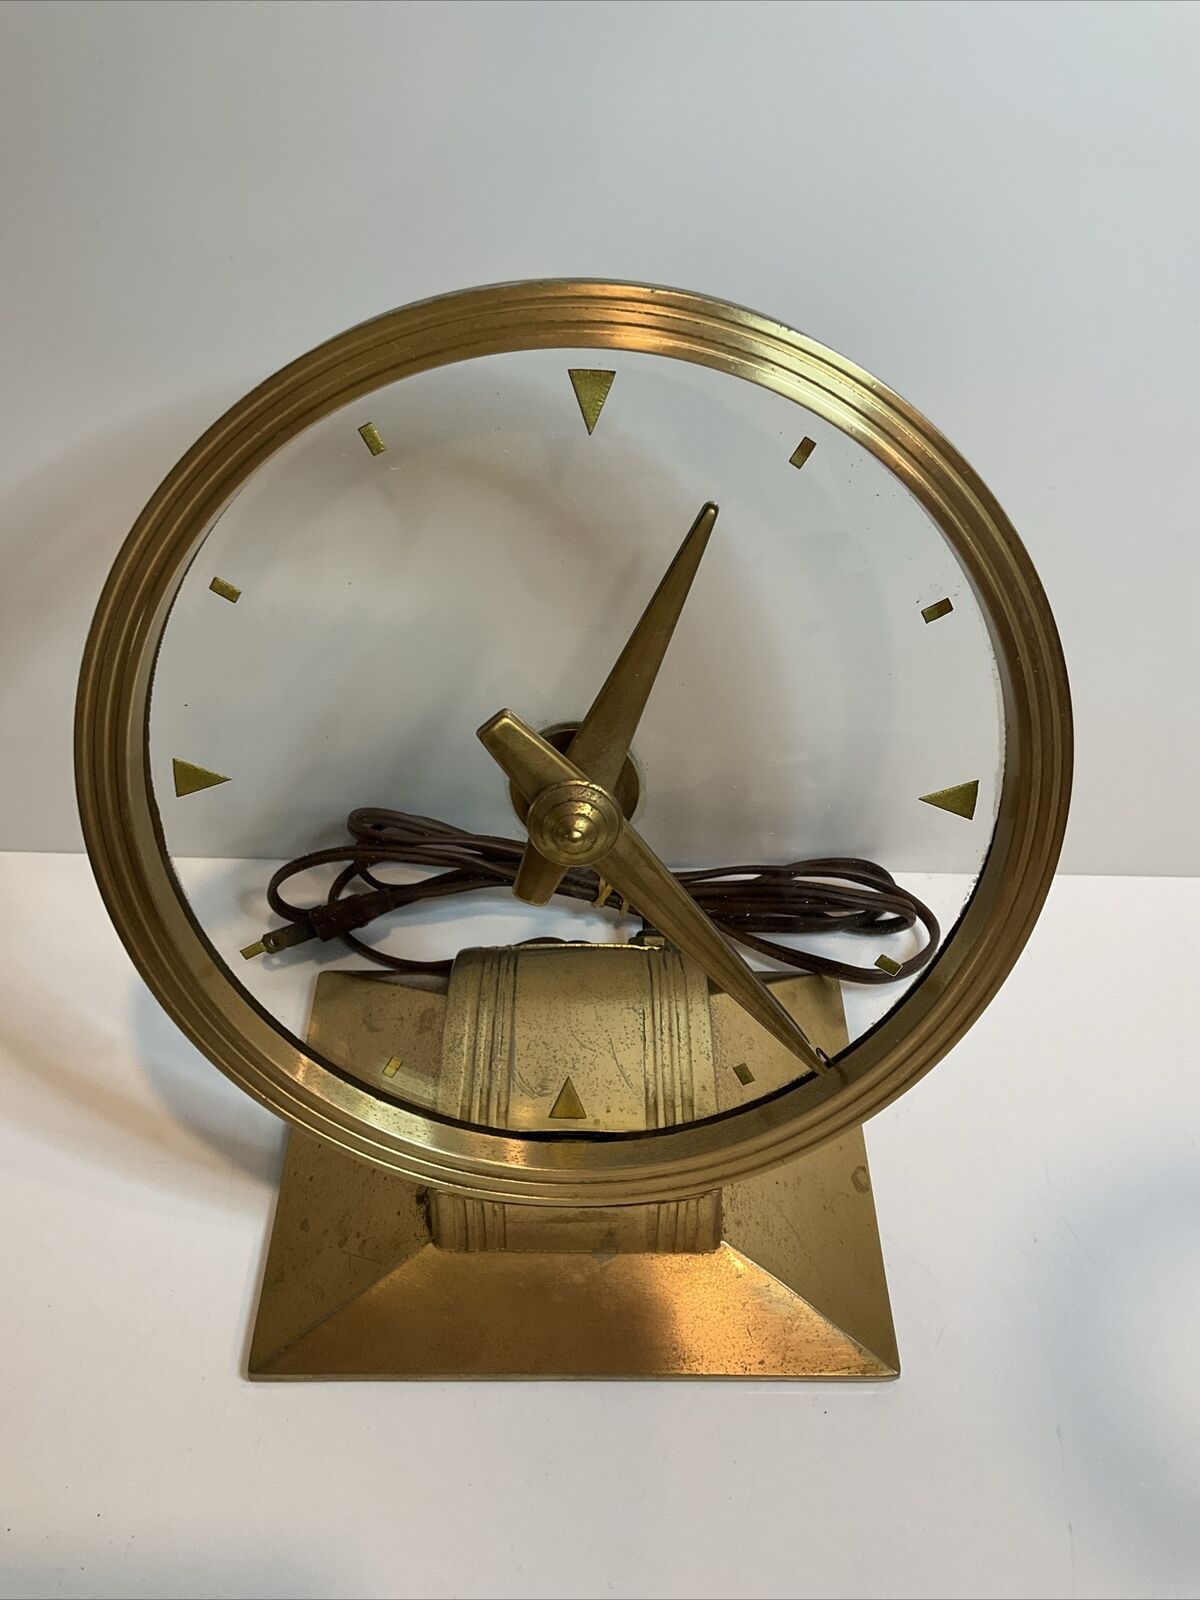 Haddon Golden Vision Electric Clock 1950’s Working and Keeping Good Time